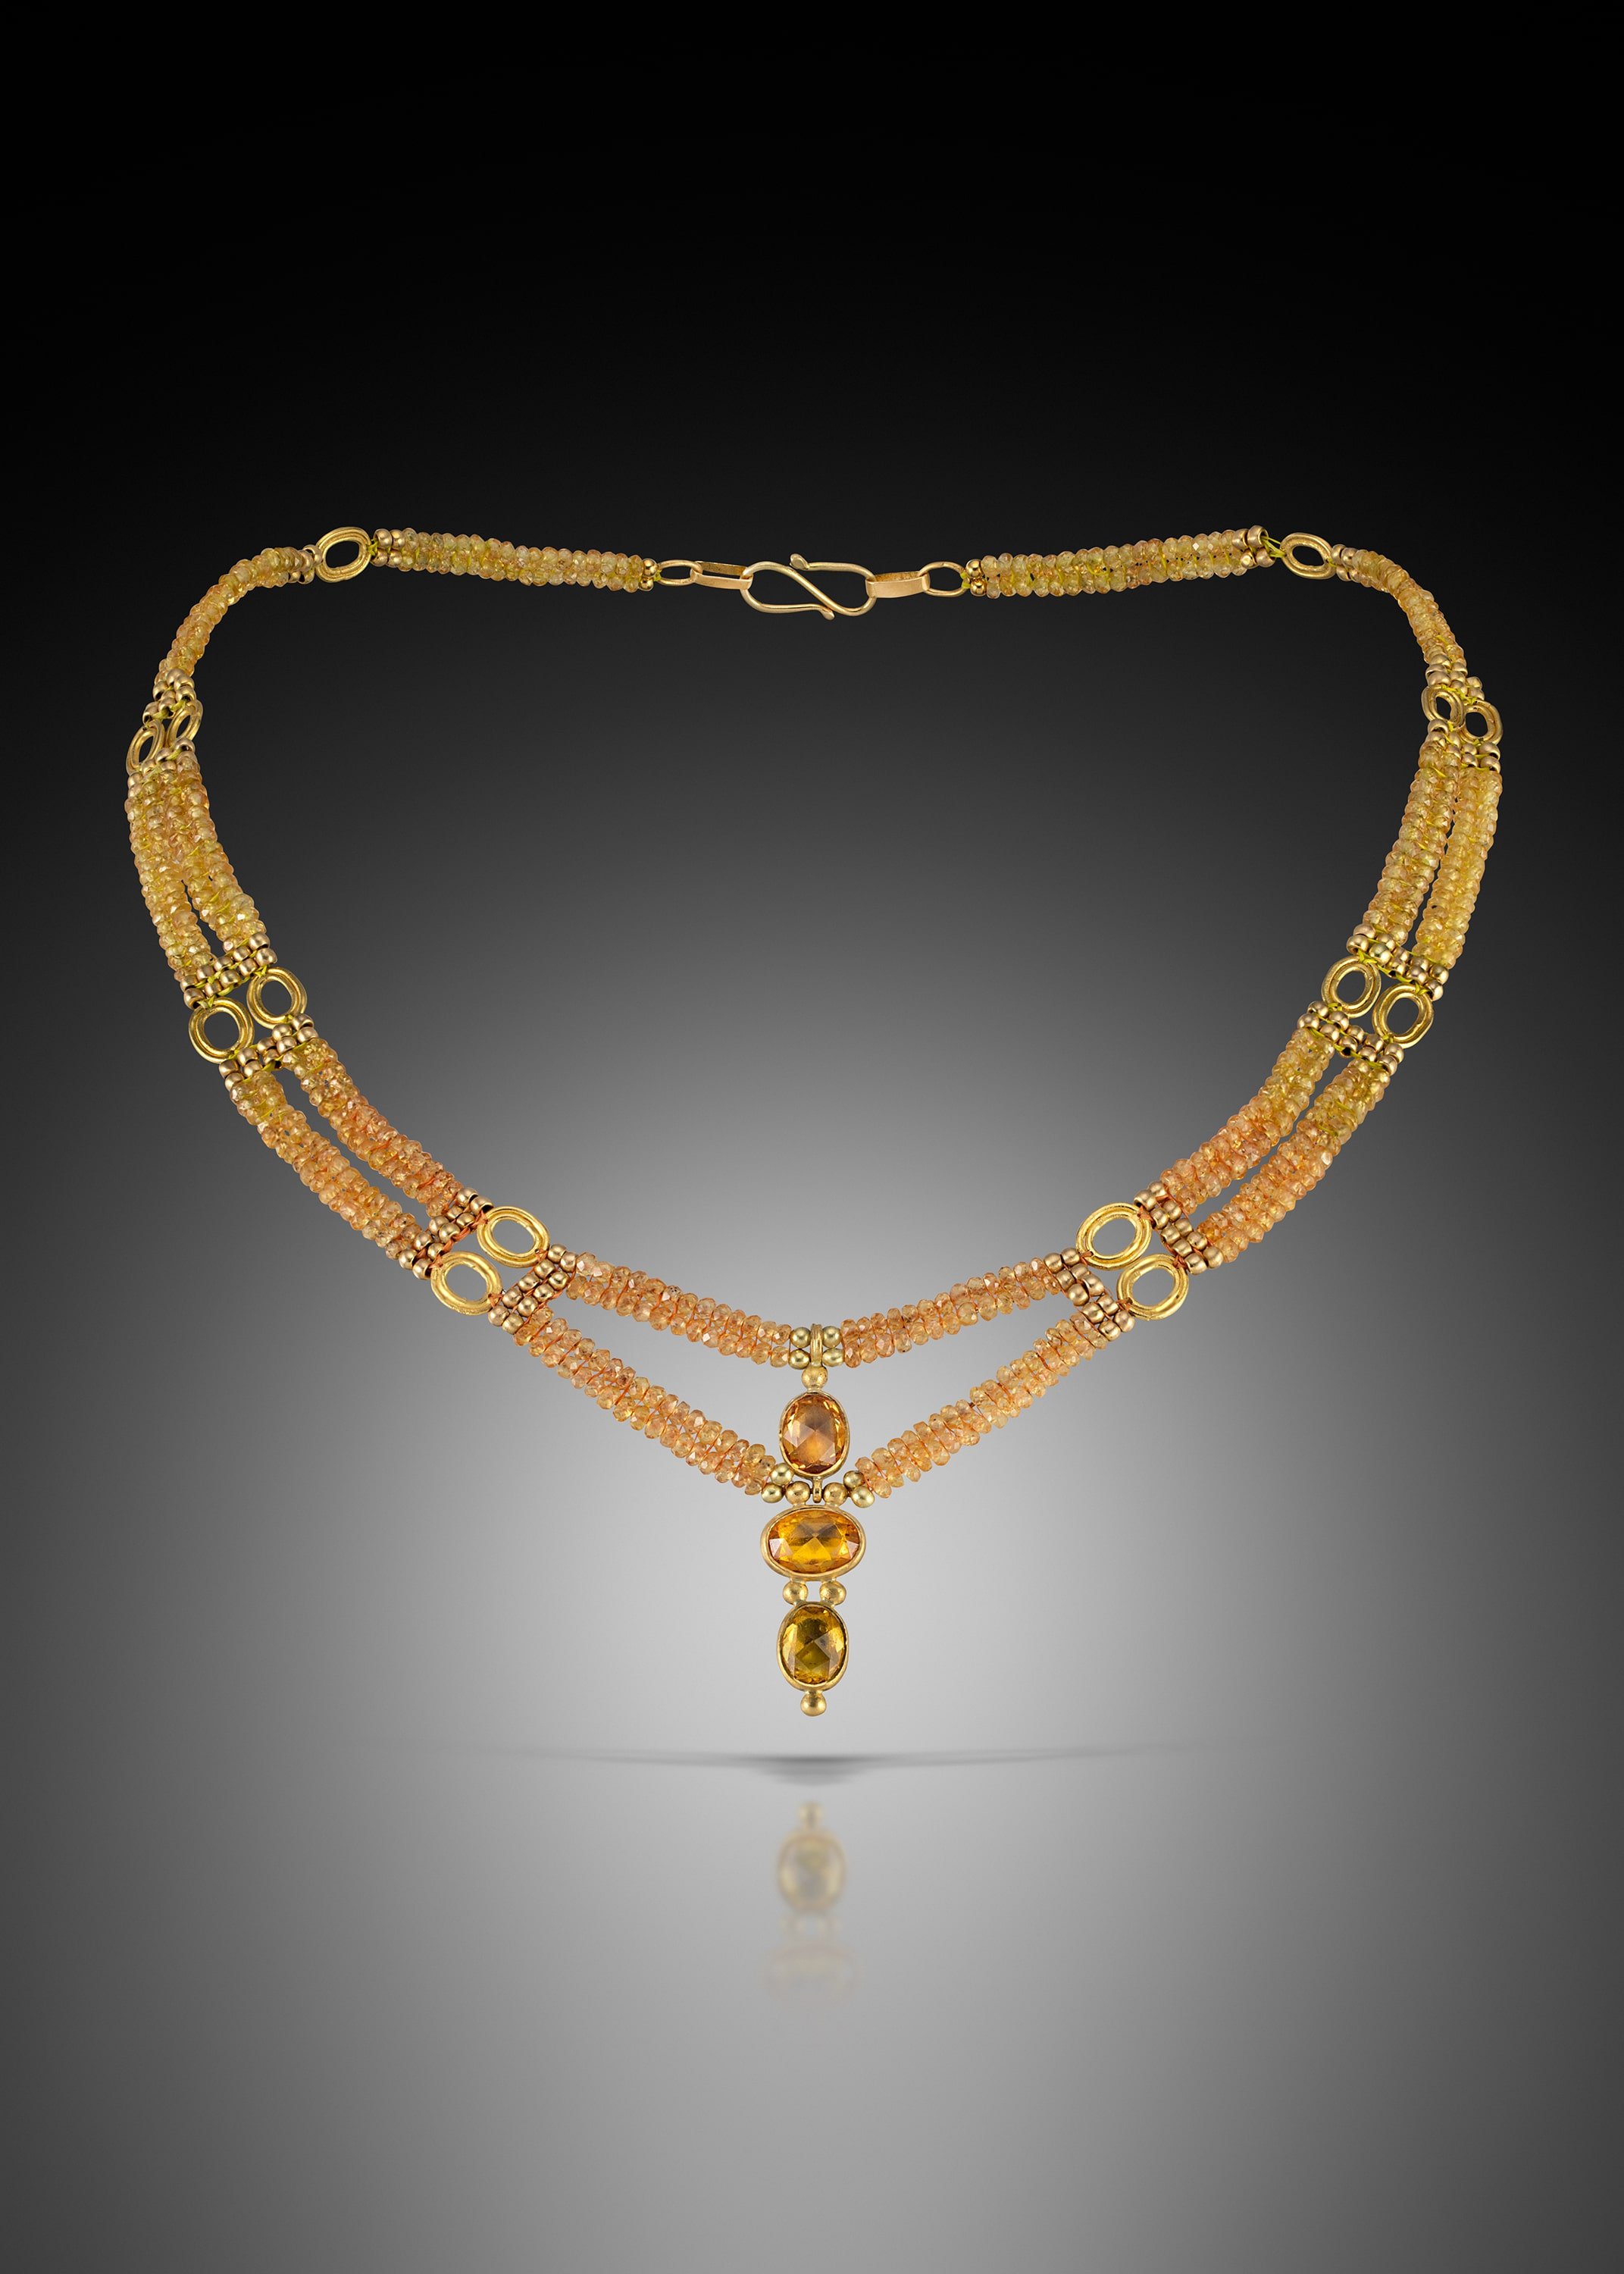 Yellow Sapphire Collar.  The collar is hand woven of yellow sapphire, and 20k gold beads with 22k gold charms; the pendant is hand fused and fabricated of rose cut yellow sapphires set in 22k gold.